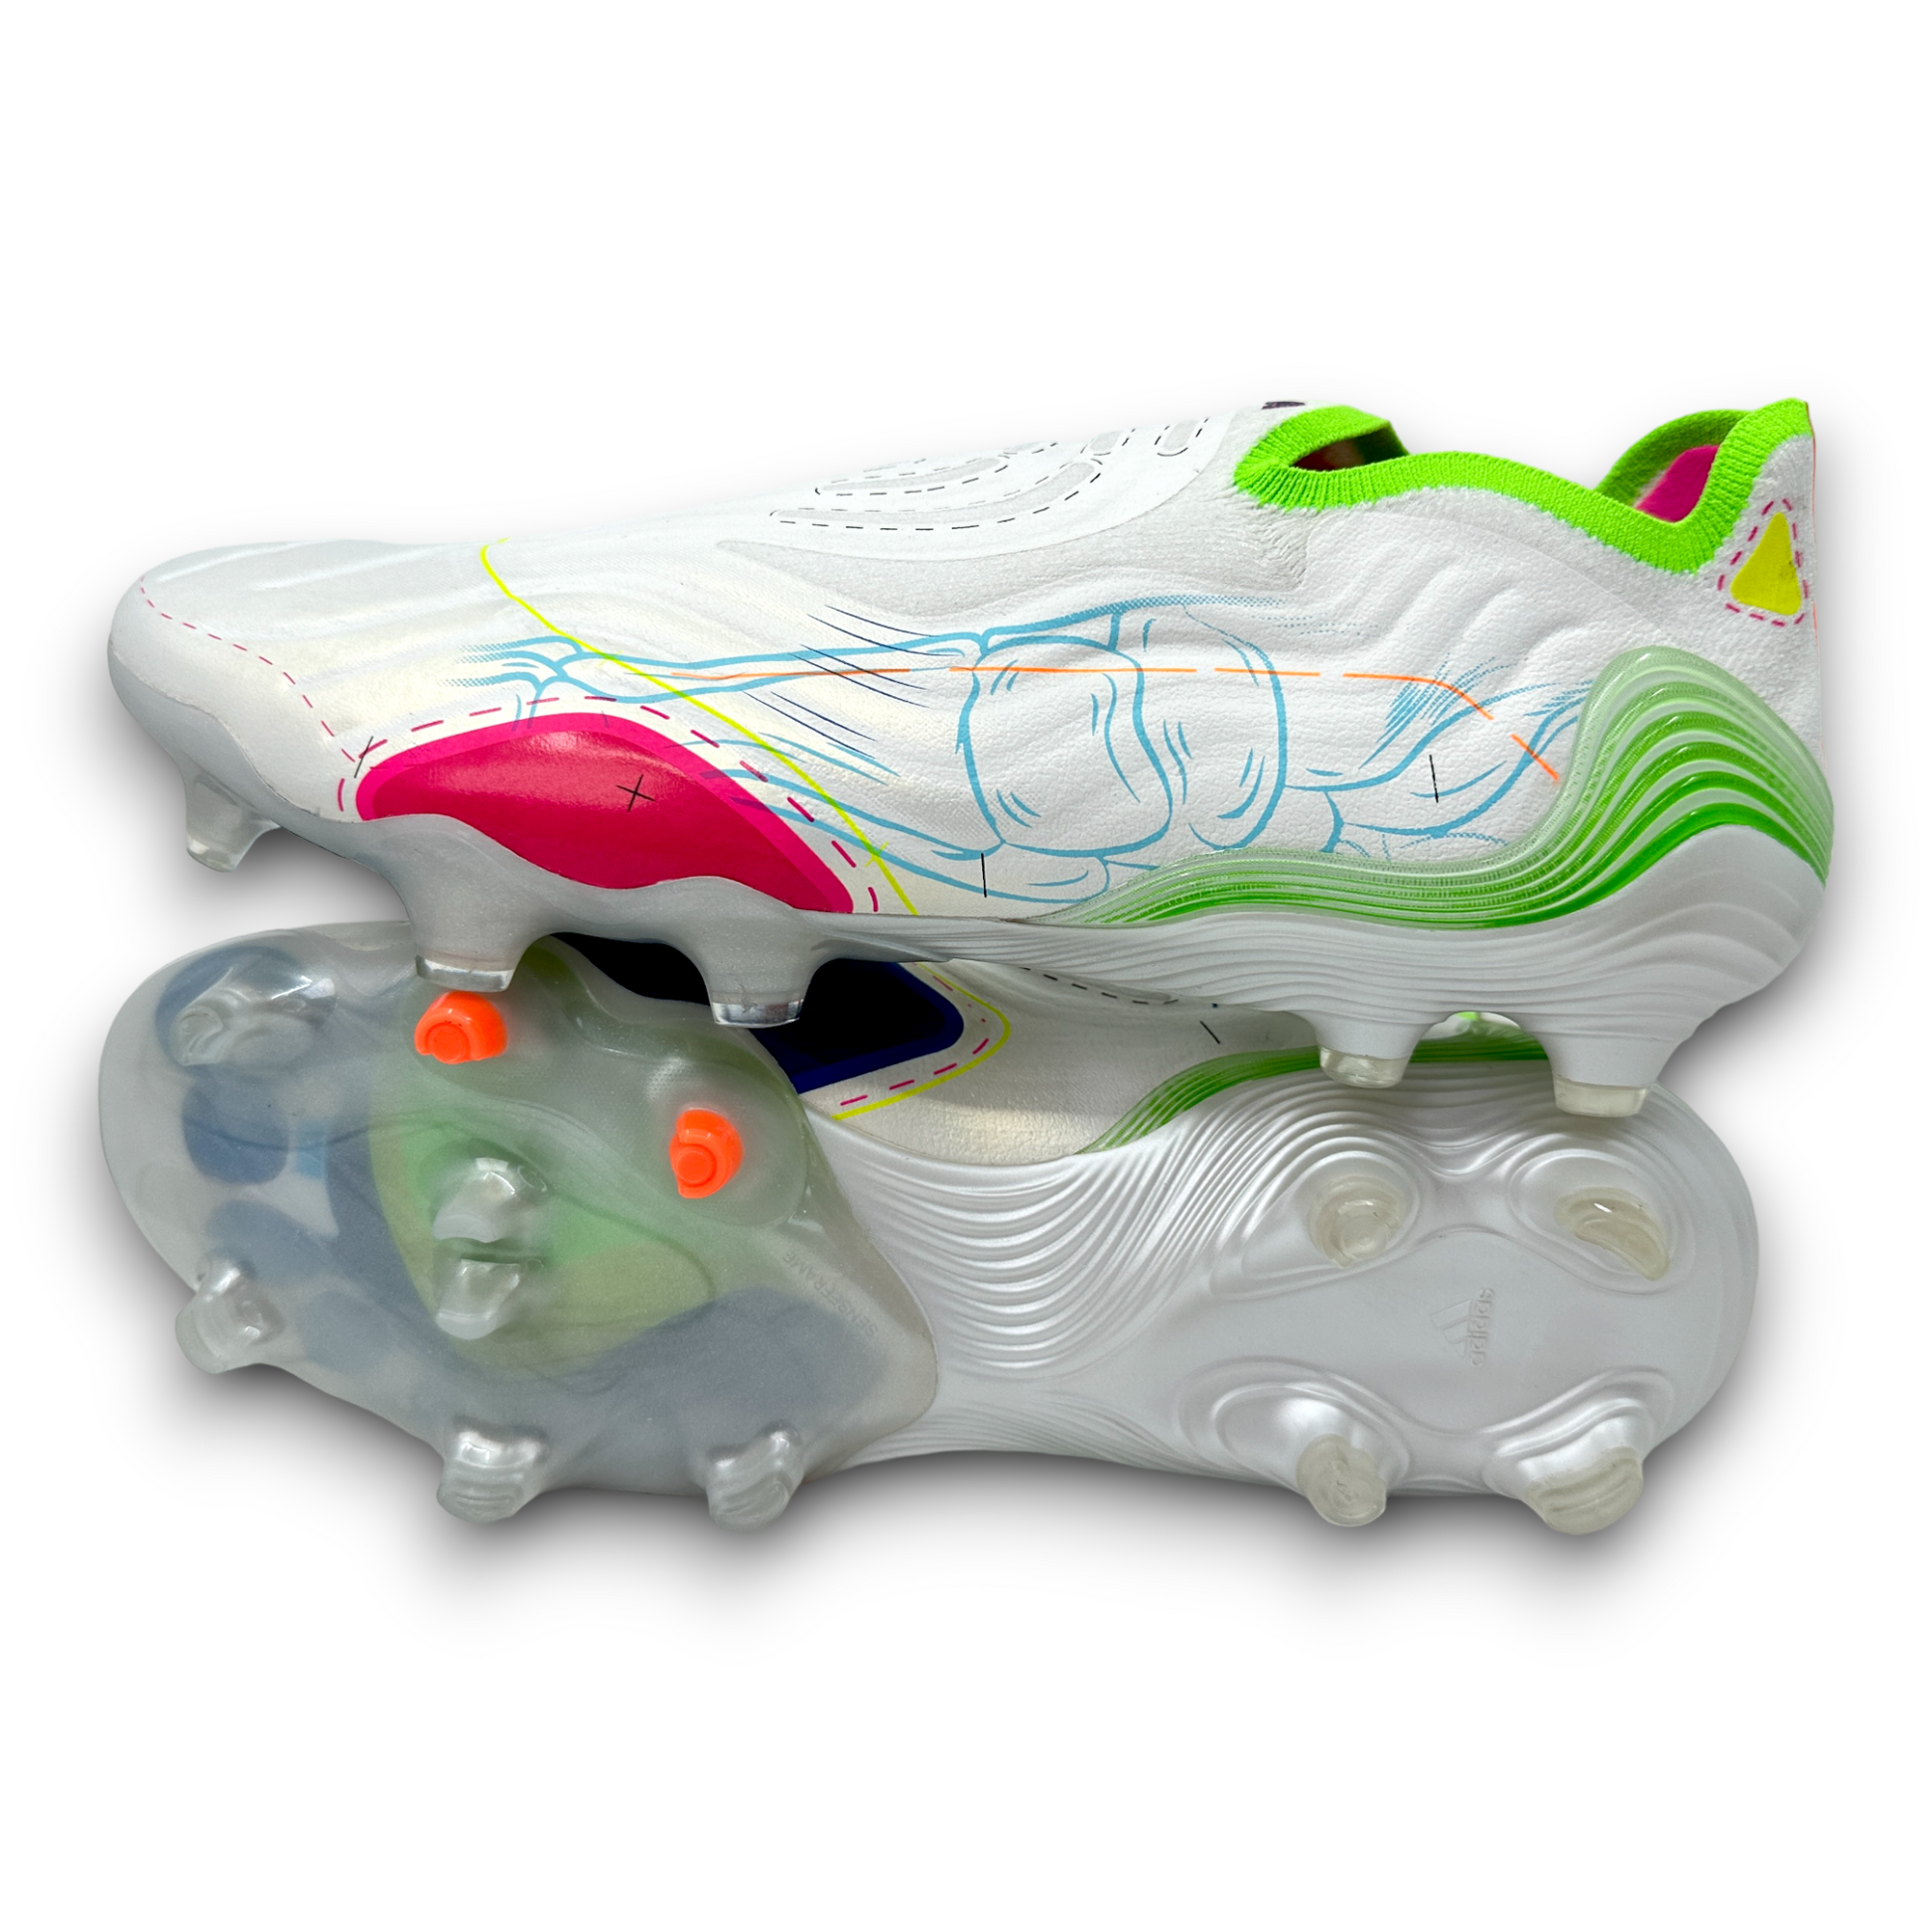 Adidas Copa Sense+ FG "Inner Life Pack" Limited Edition shoptcrampons